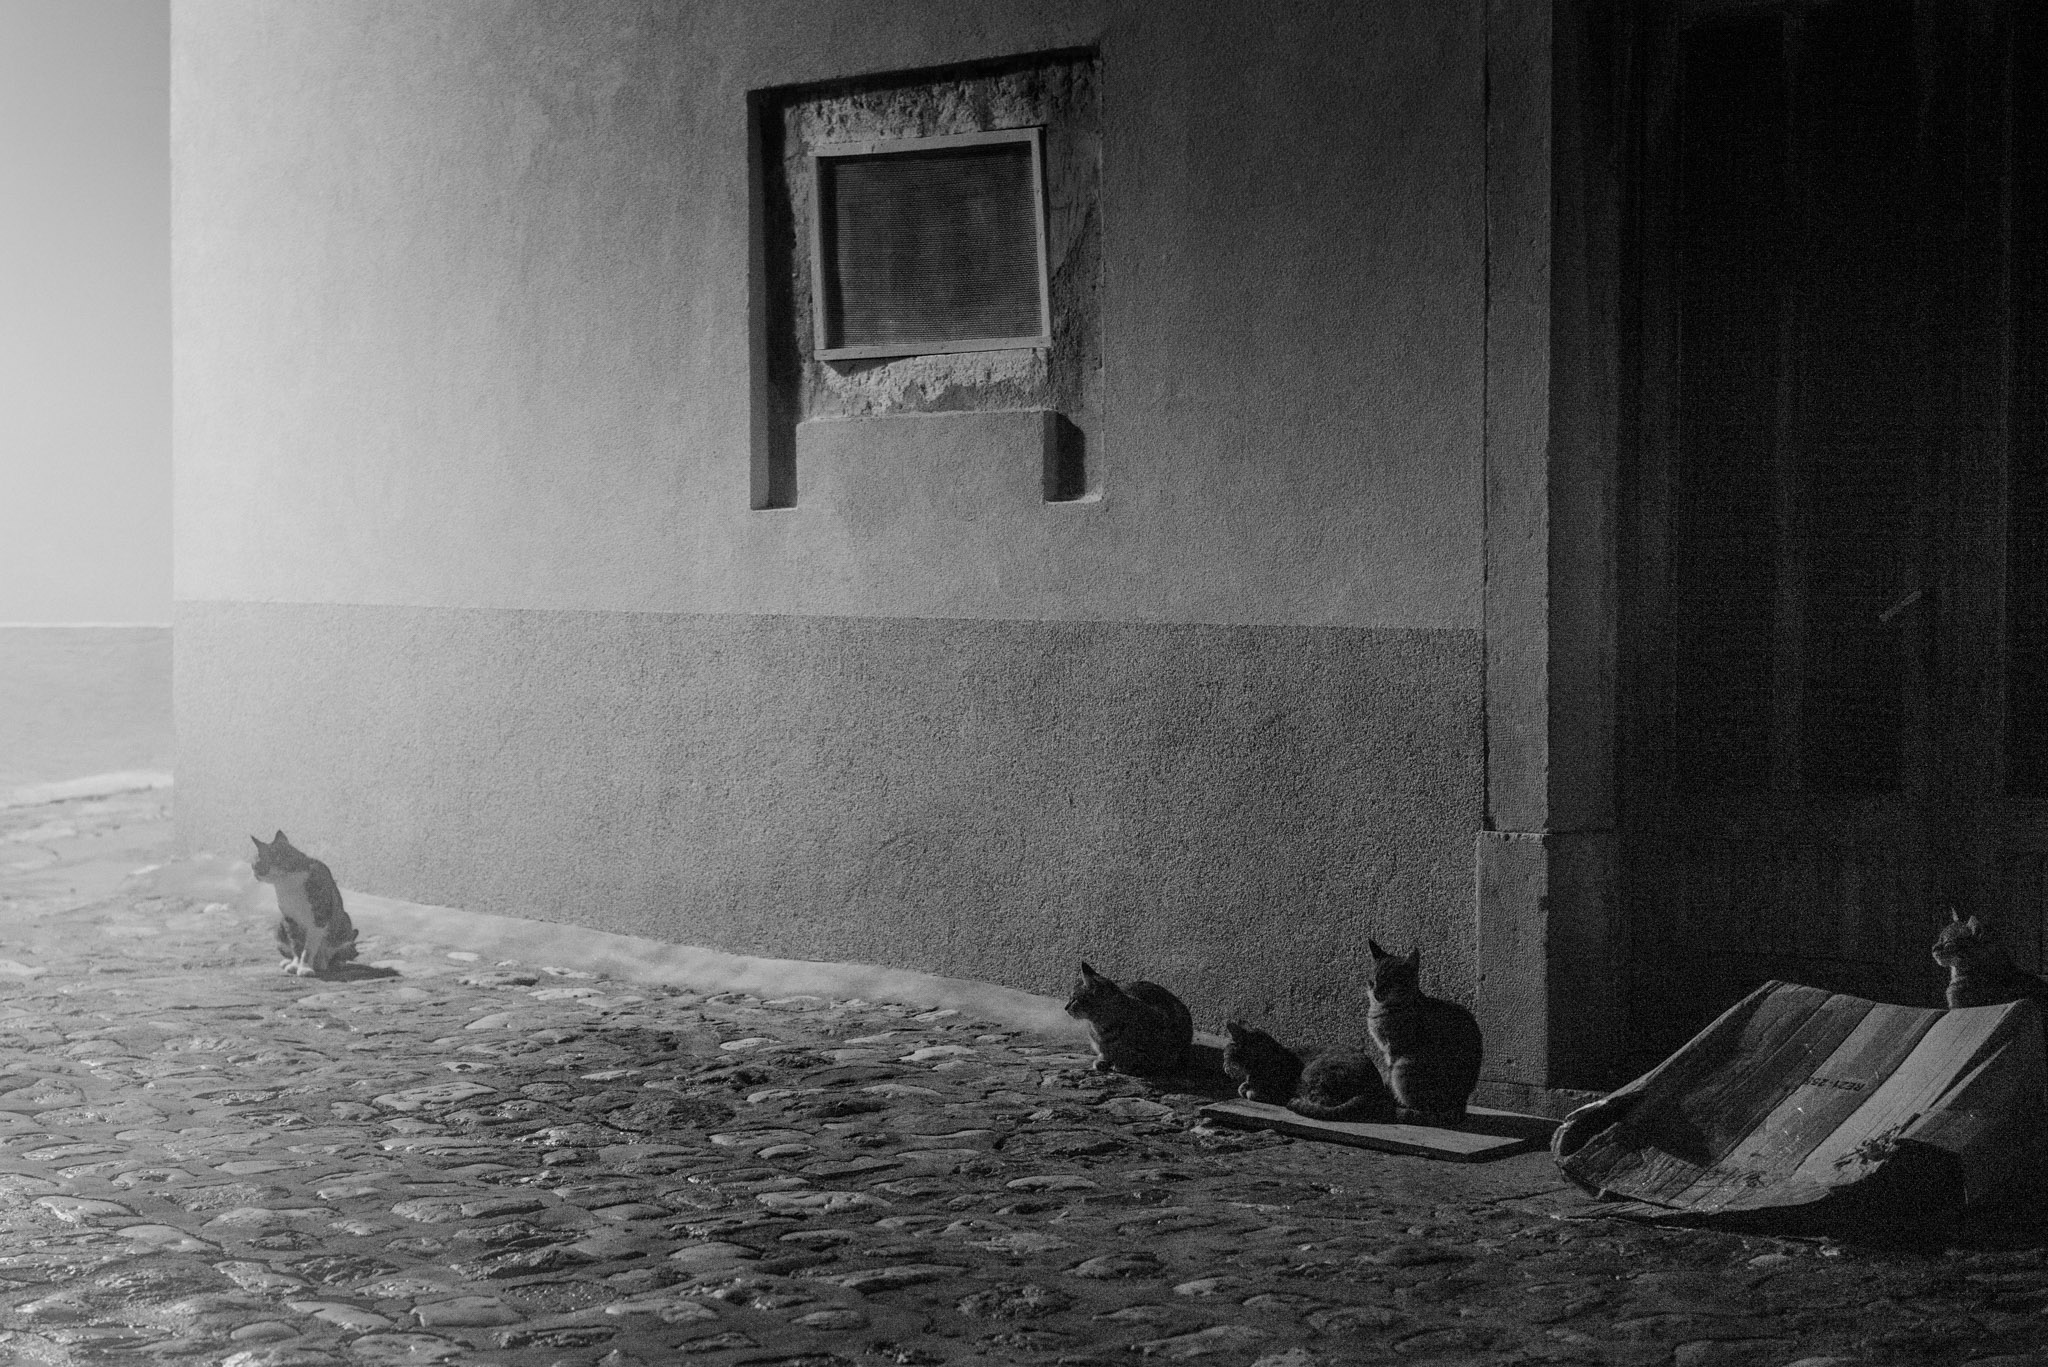 Several cats sit along a cobbled street on a foggy night in the the old town of Krk on the island of Krk in Croatia.